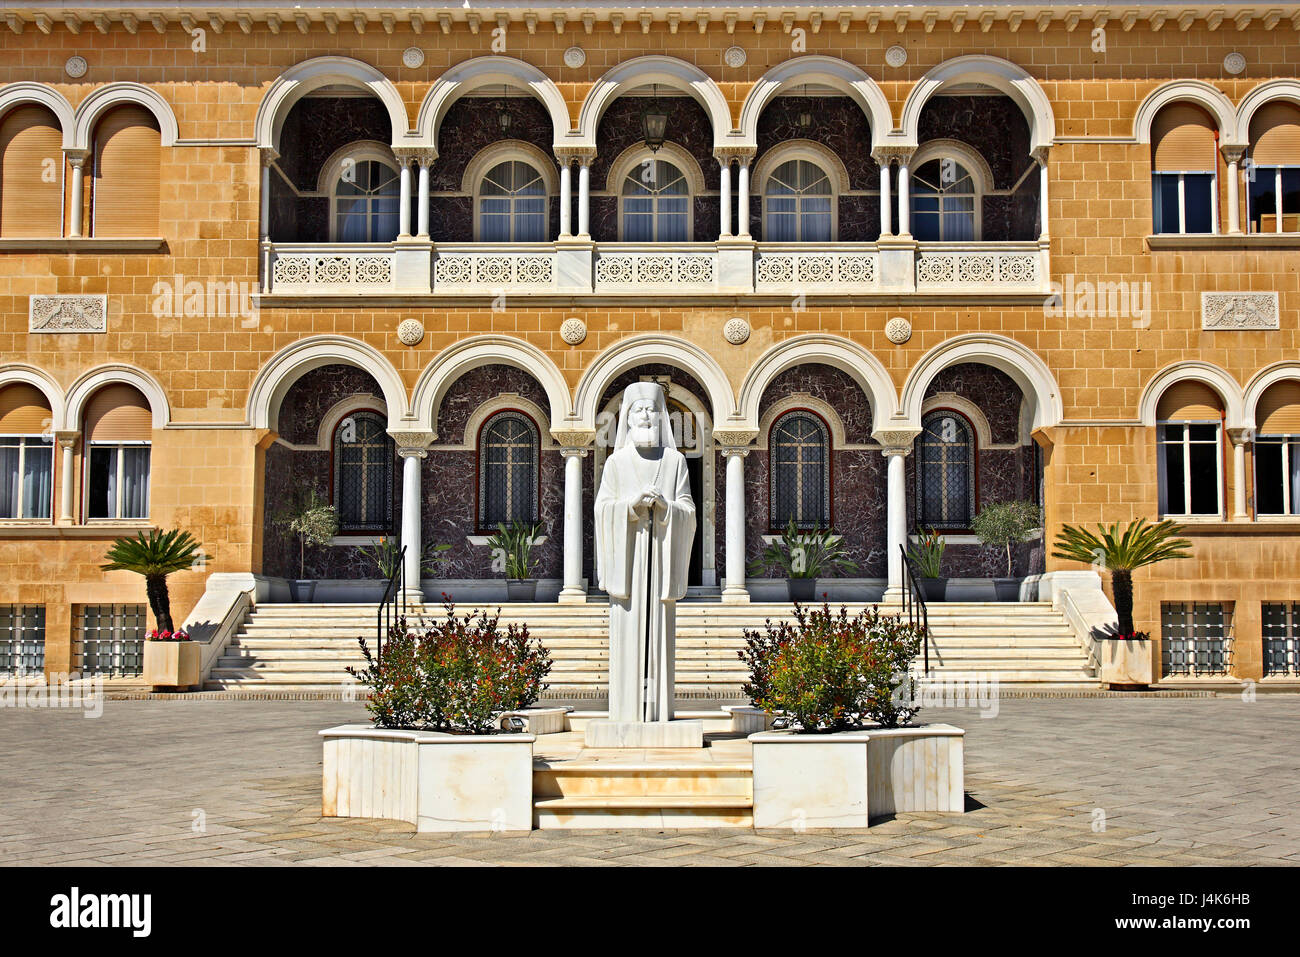 The Archbishop's palace with a statue of Archbishop Makarios III in the old town of Nicosia (Lefkosia), Cyprus. Stock Photo